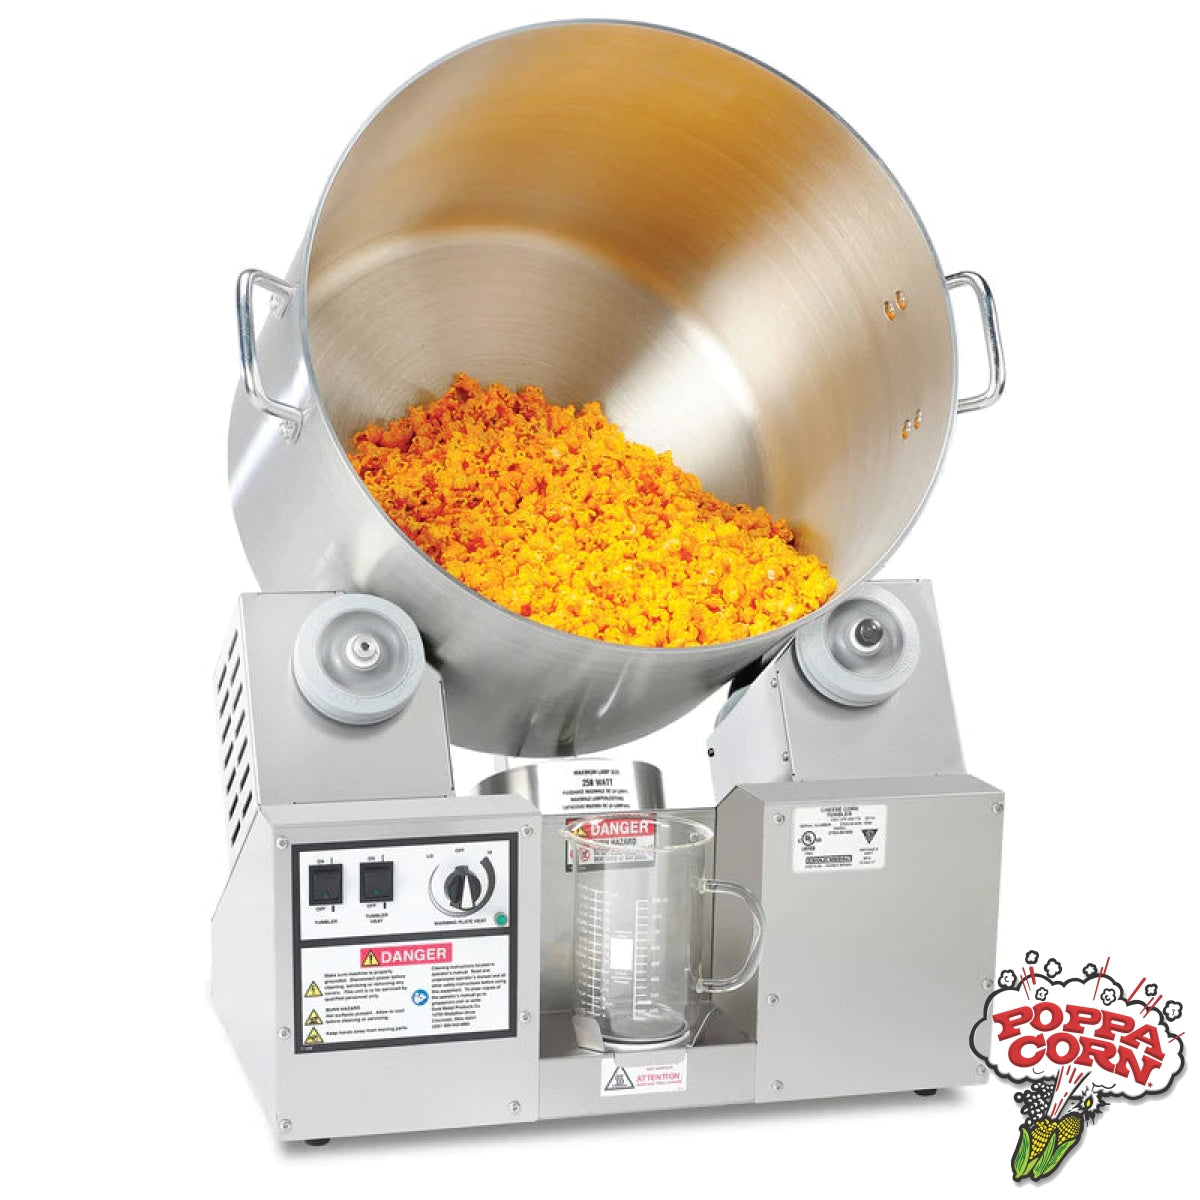 Cheddar Tumbler/Coater with Hot Plate & Heat Lamp (8 gal.) - GM2703-00-000 - Poppa Corn Corp